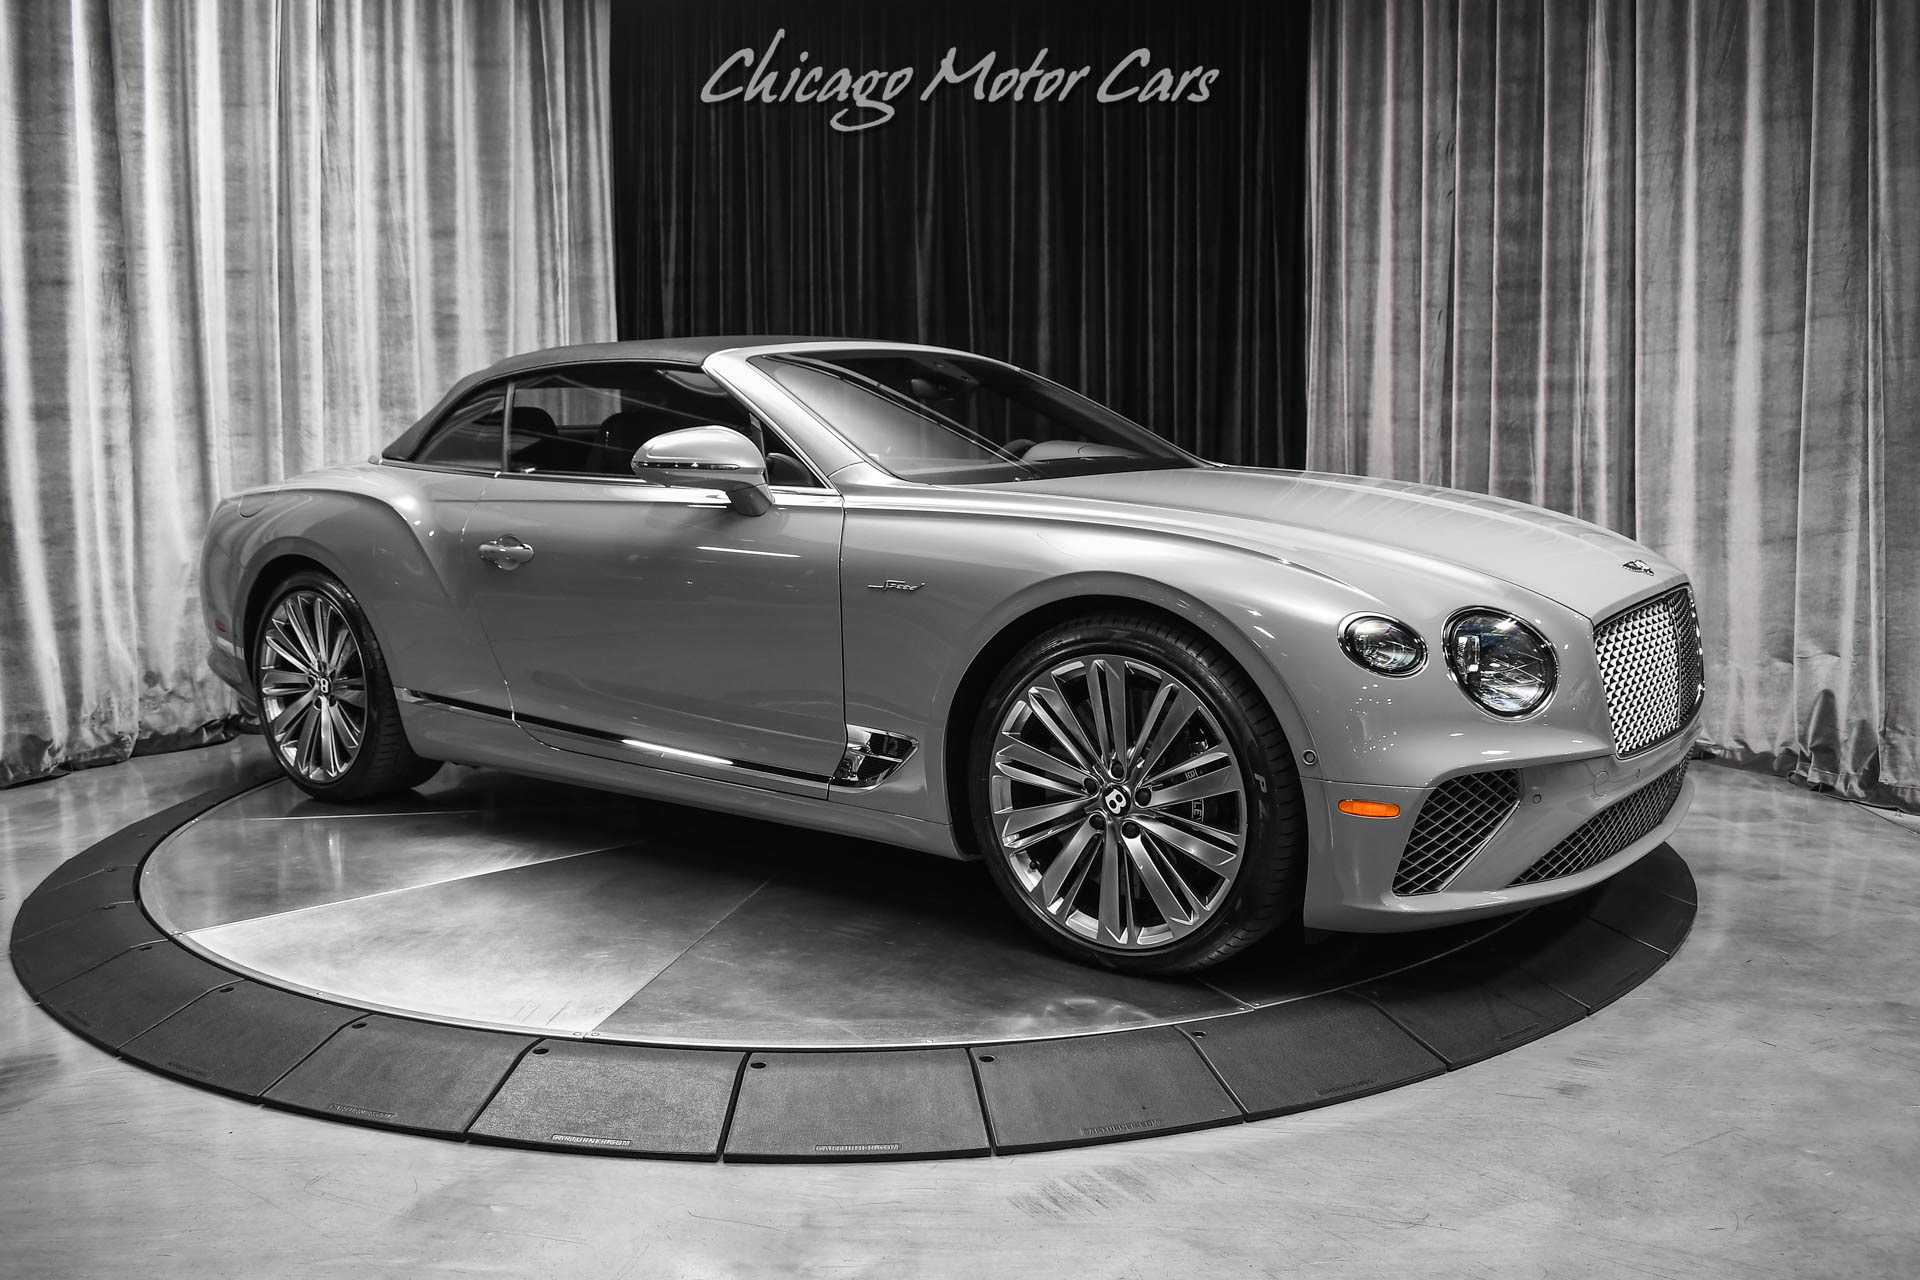 Used-2022-Bentley-Continental-GTC-Speed-Only-1200-Miles-357kMSRP-Ceramic-Brakes-Carbon-Fiber-Hot-Spec